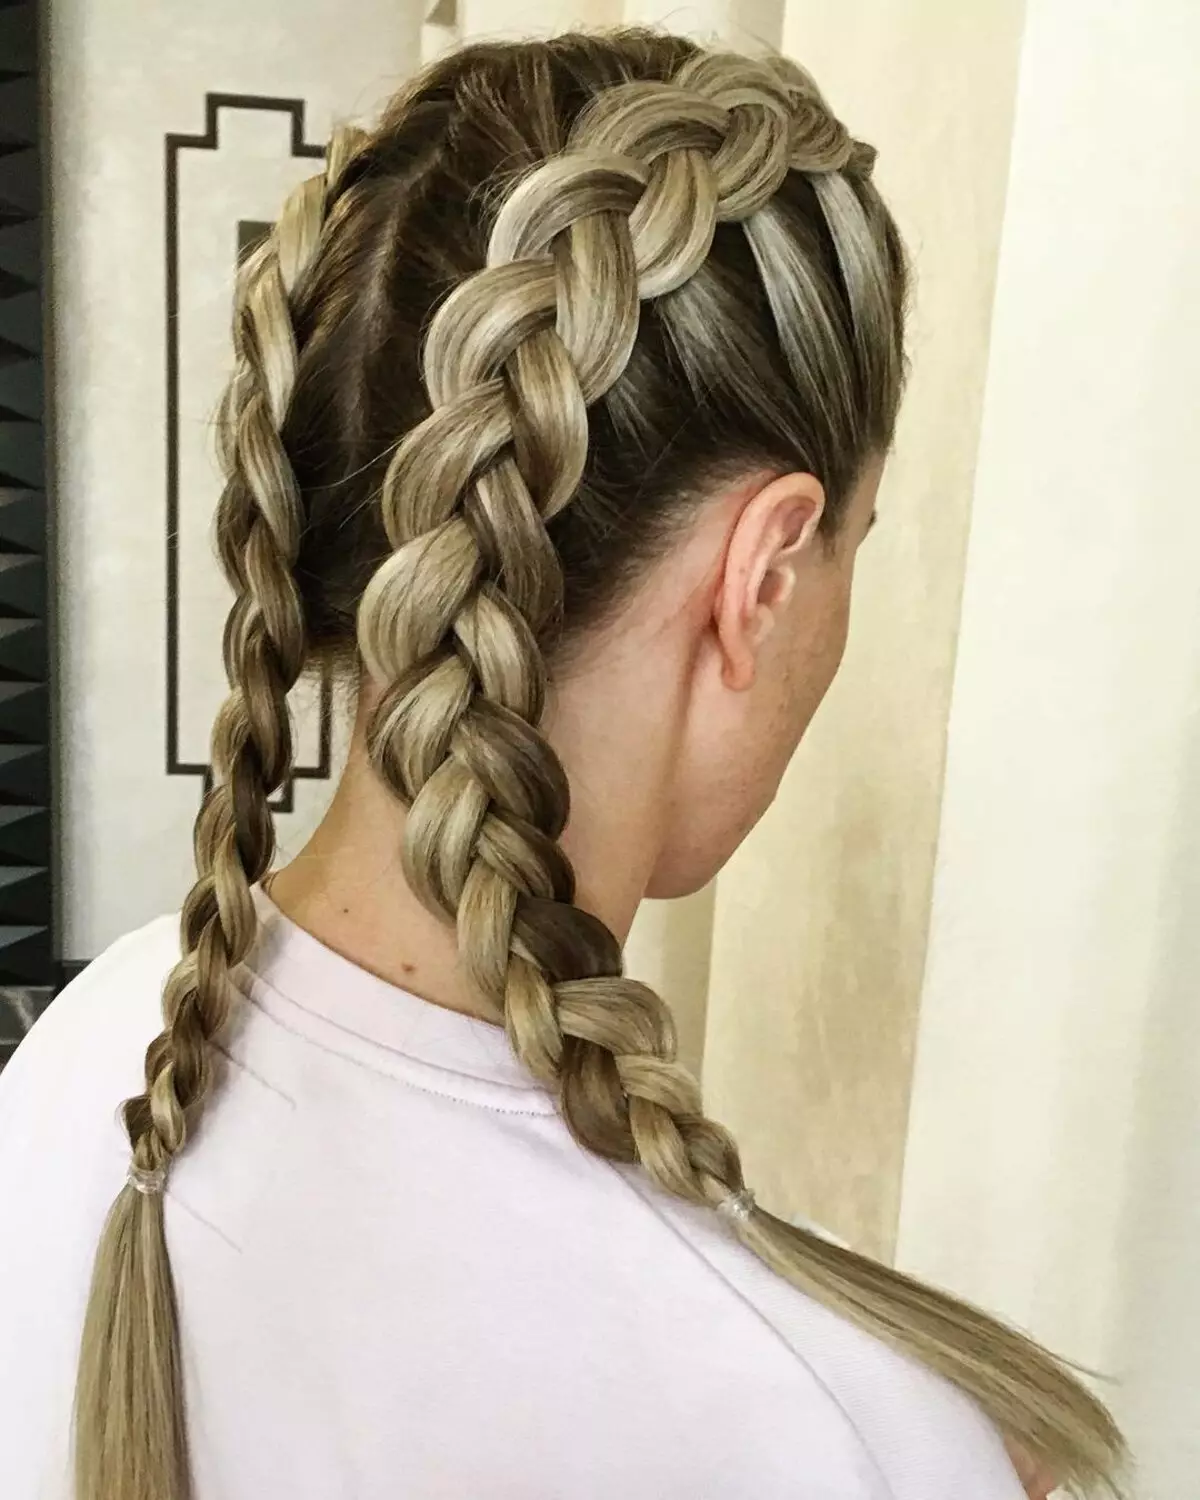 How to braid two pigtails? 61 Photos How to weave 2 braids from long hair? Weaving braids on the sides. Beautiful hairstyles with braids and loose hair 5817_22